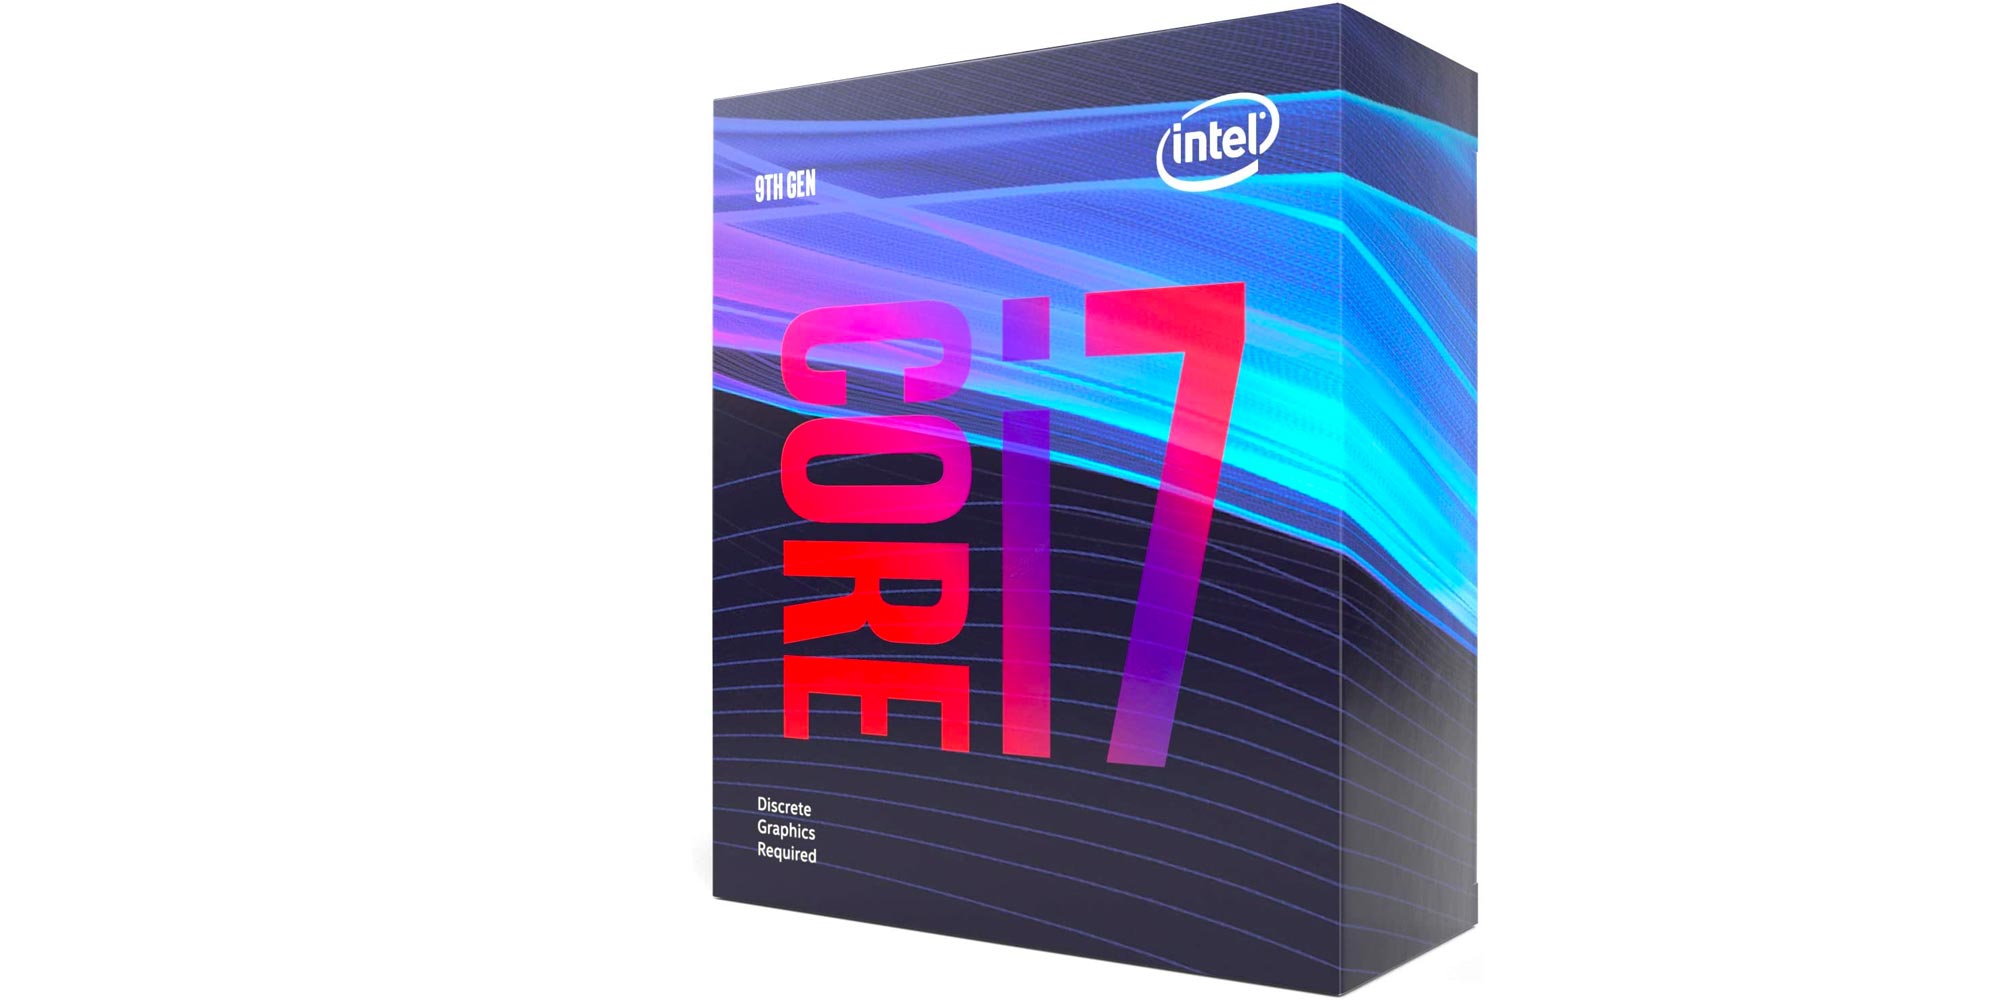 Start your PC gaming journey with the Intel i7-9700F 8-core CPU at